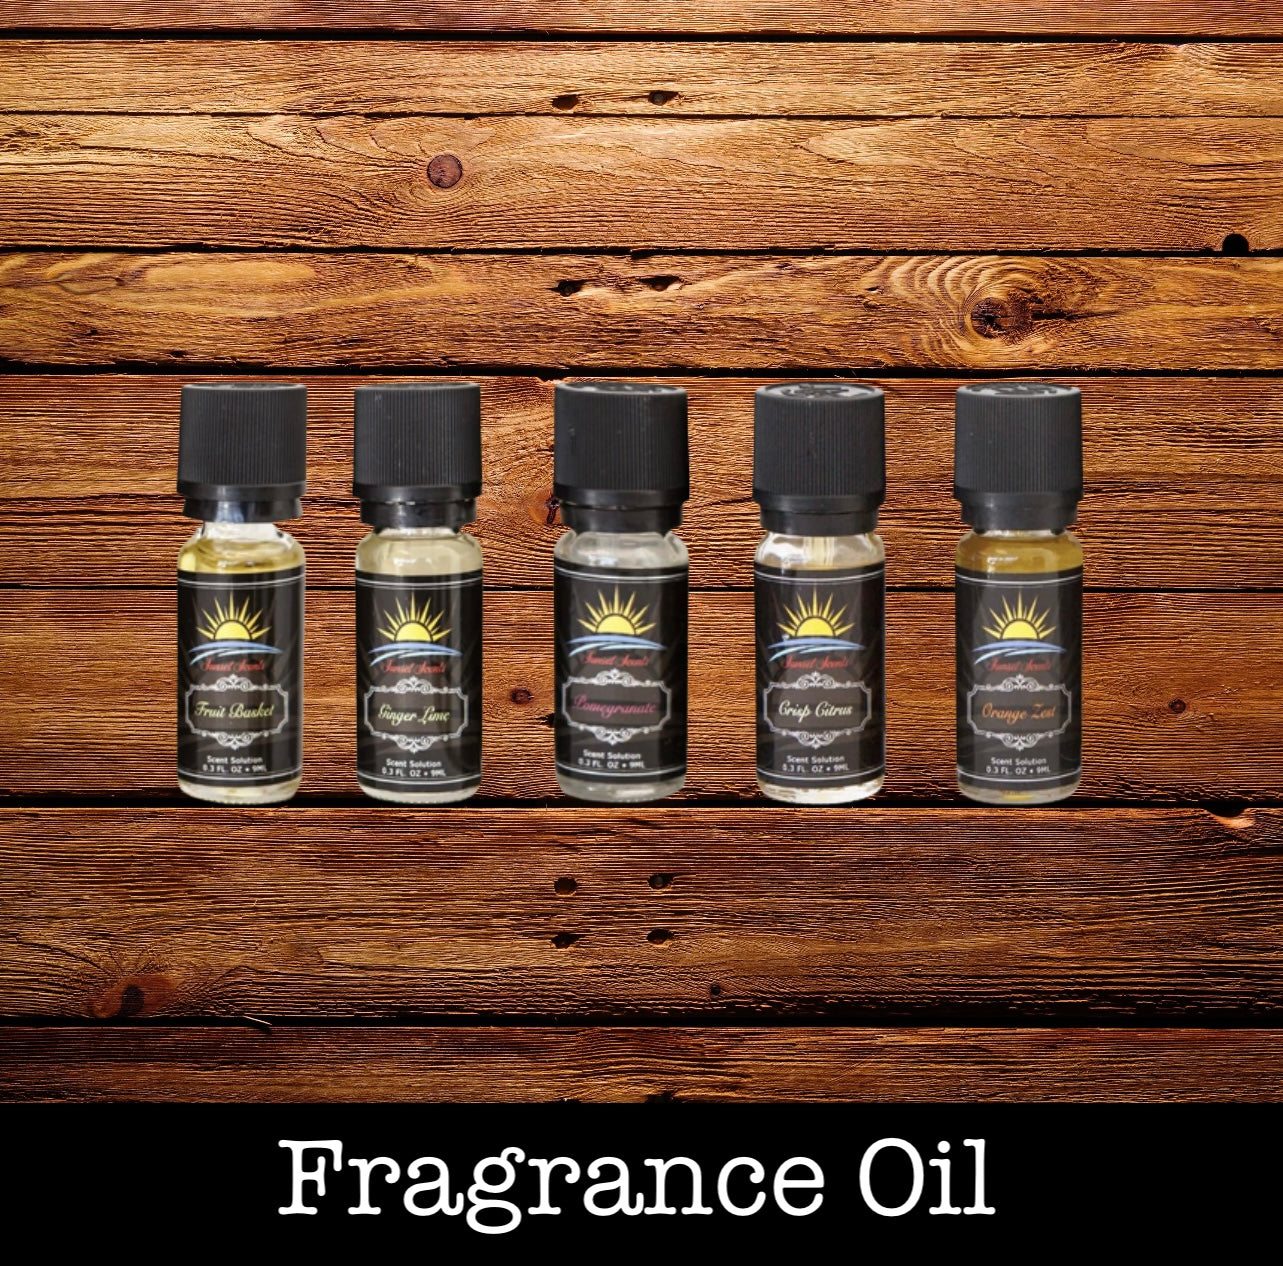 Scent Solutions  Home Fragrance Oil – Sunset Canyon Candles